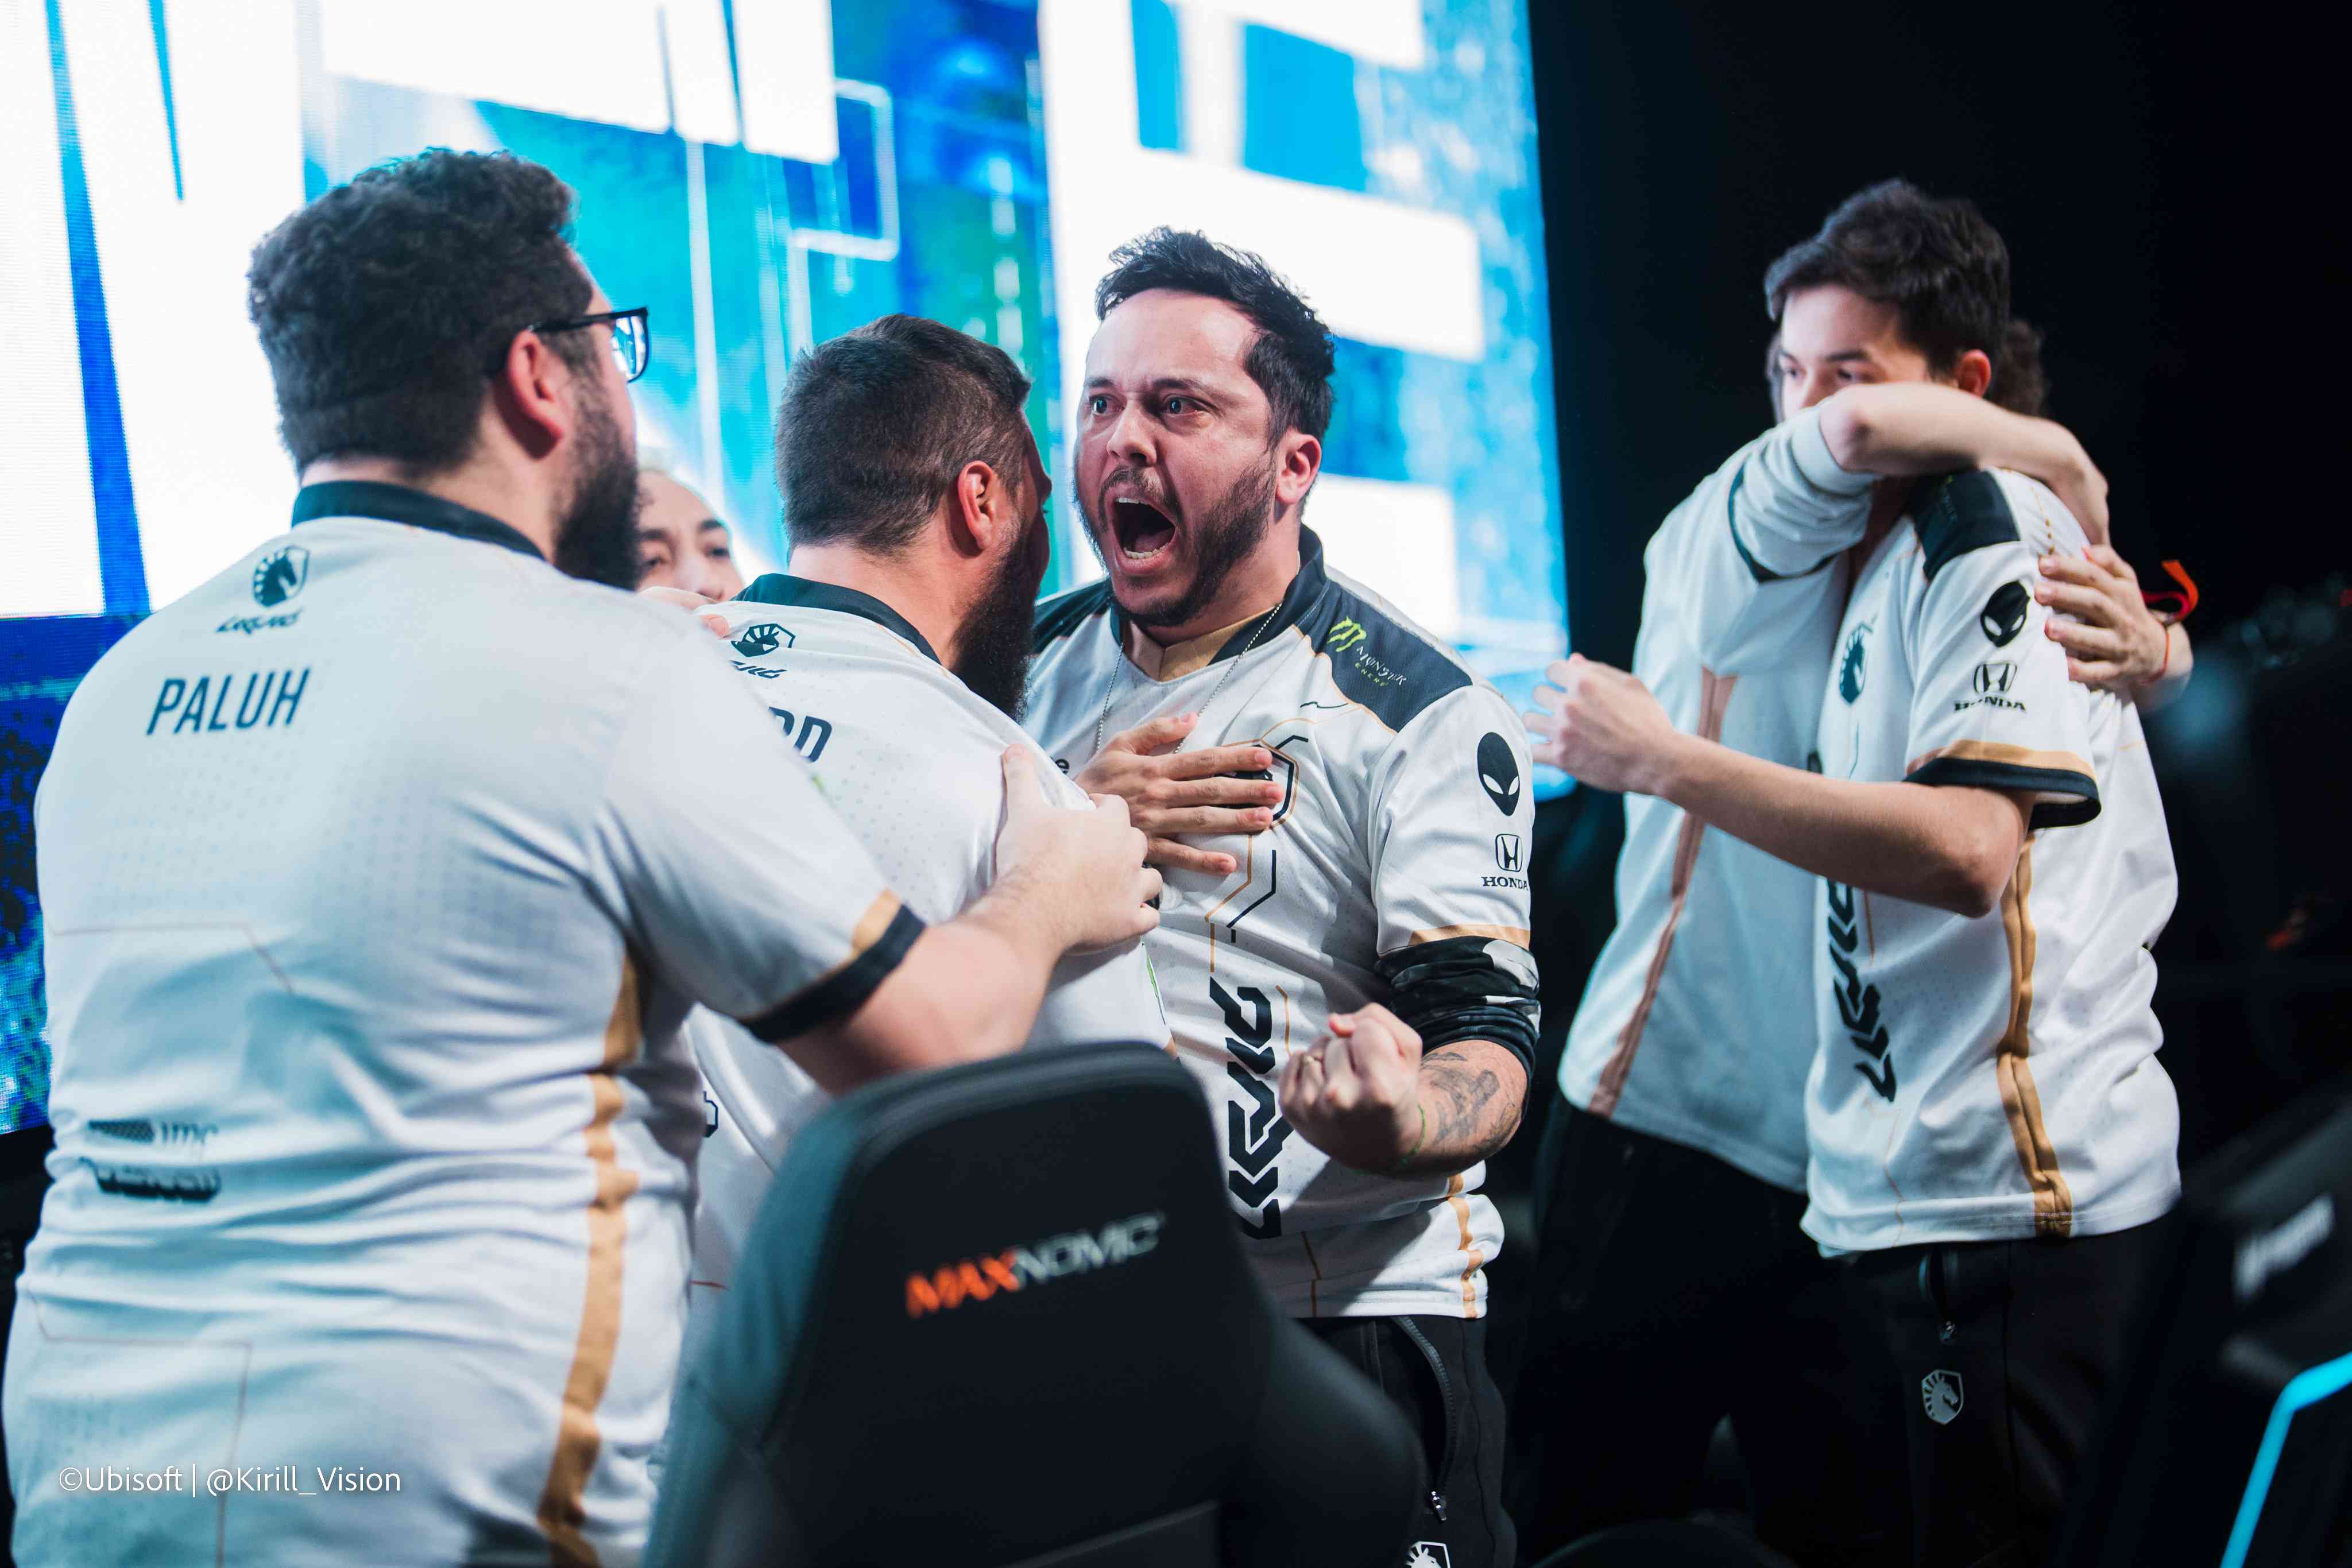 Team Liquid celebrate together after a win at the Six Major Jönköping